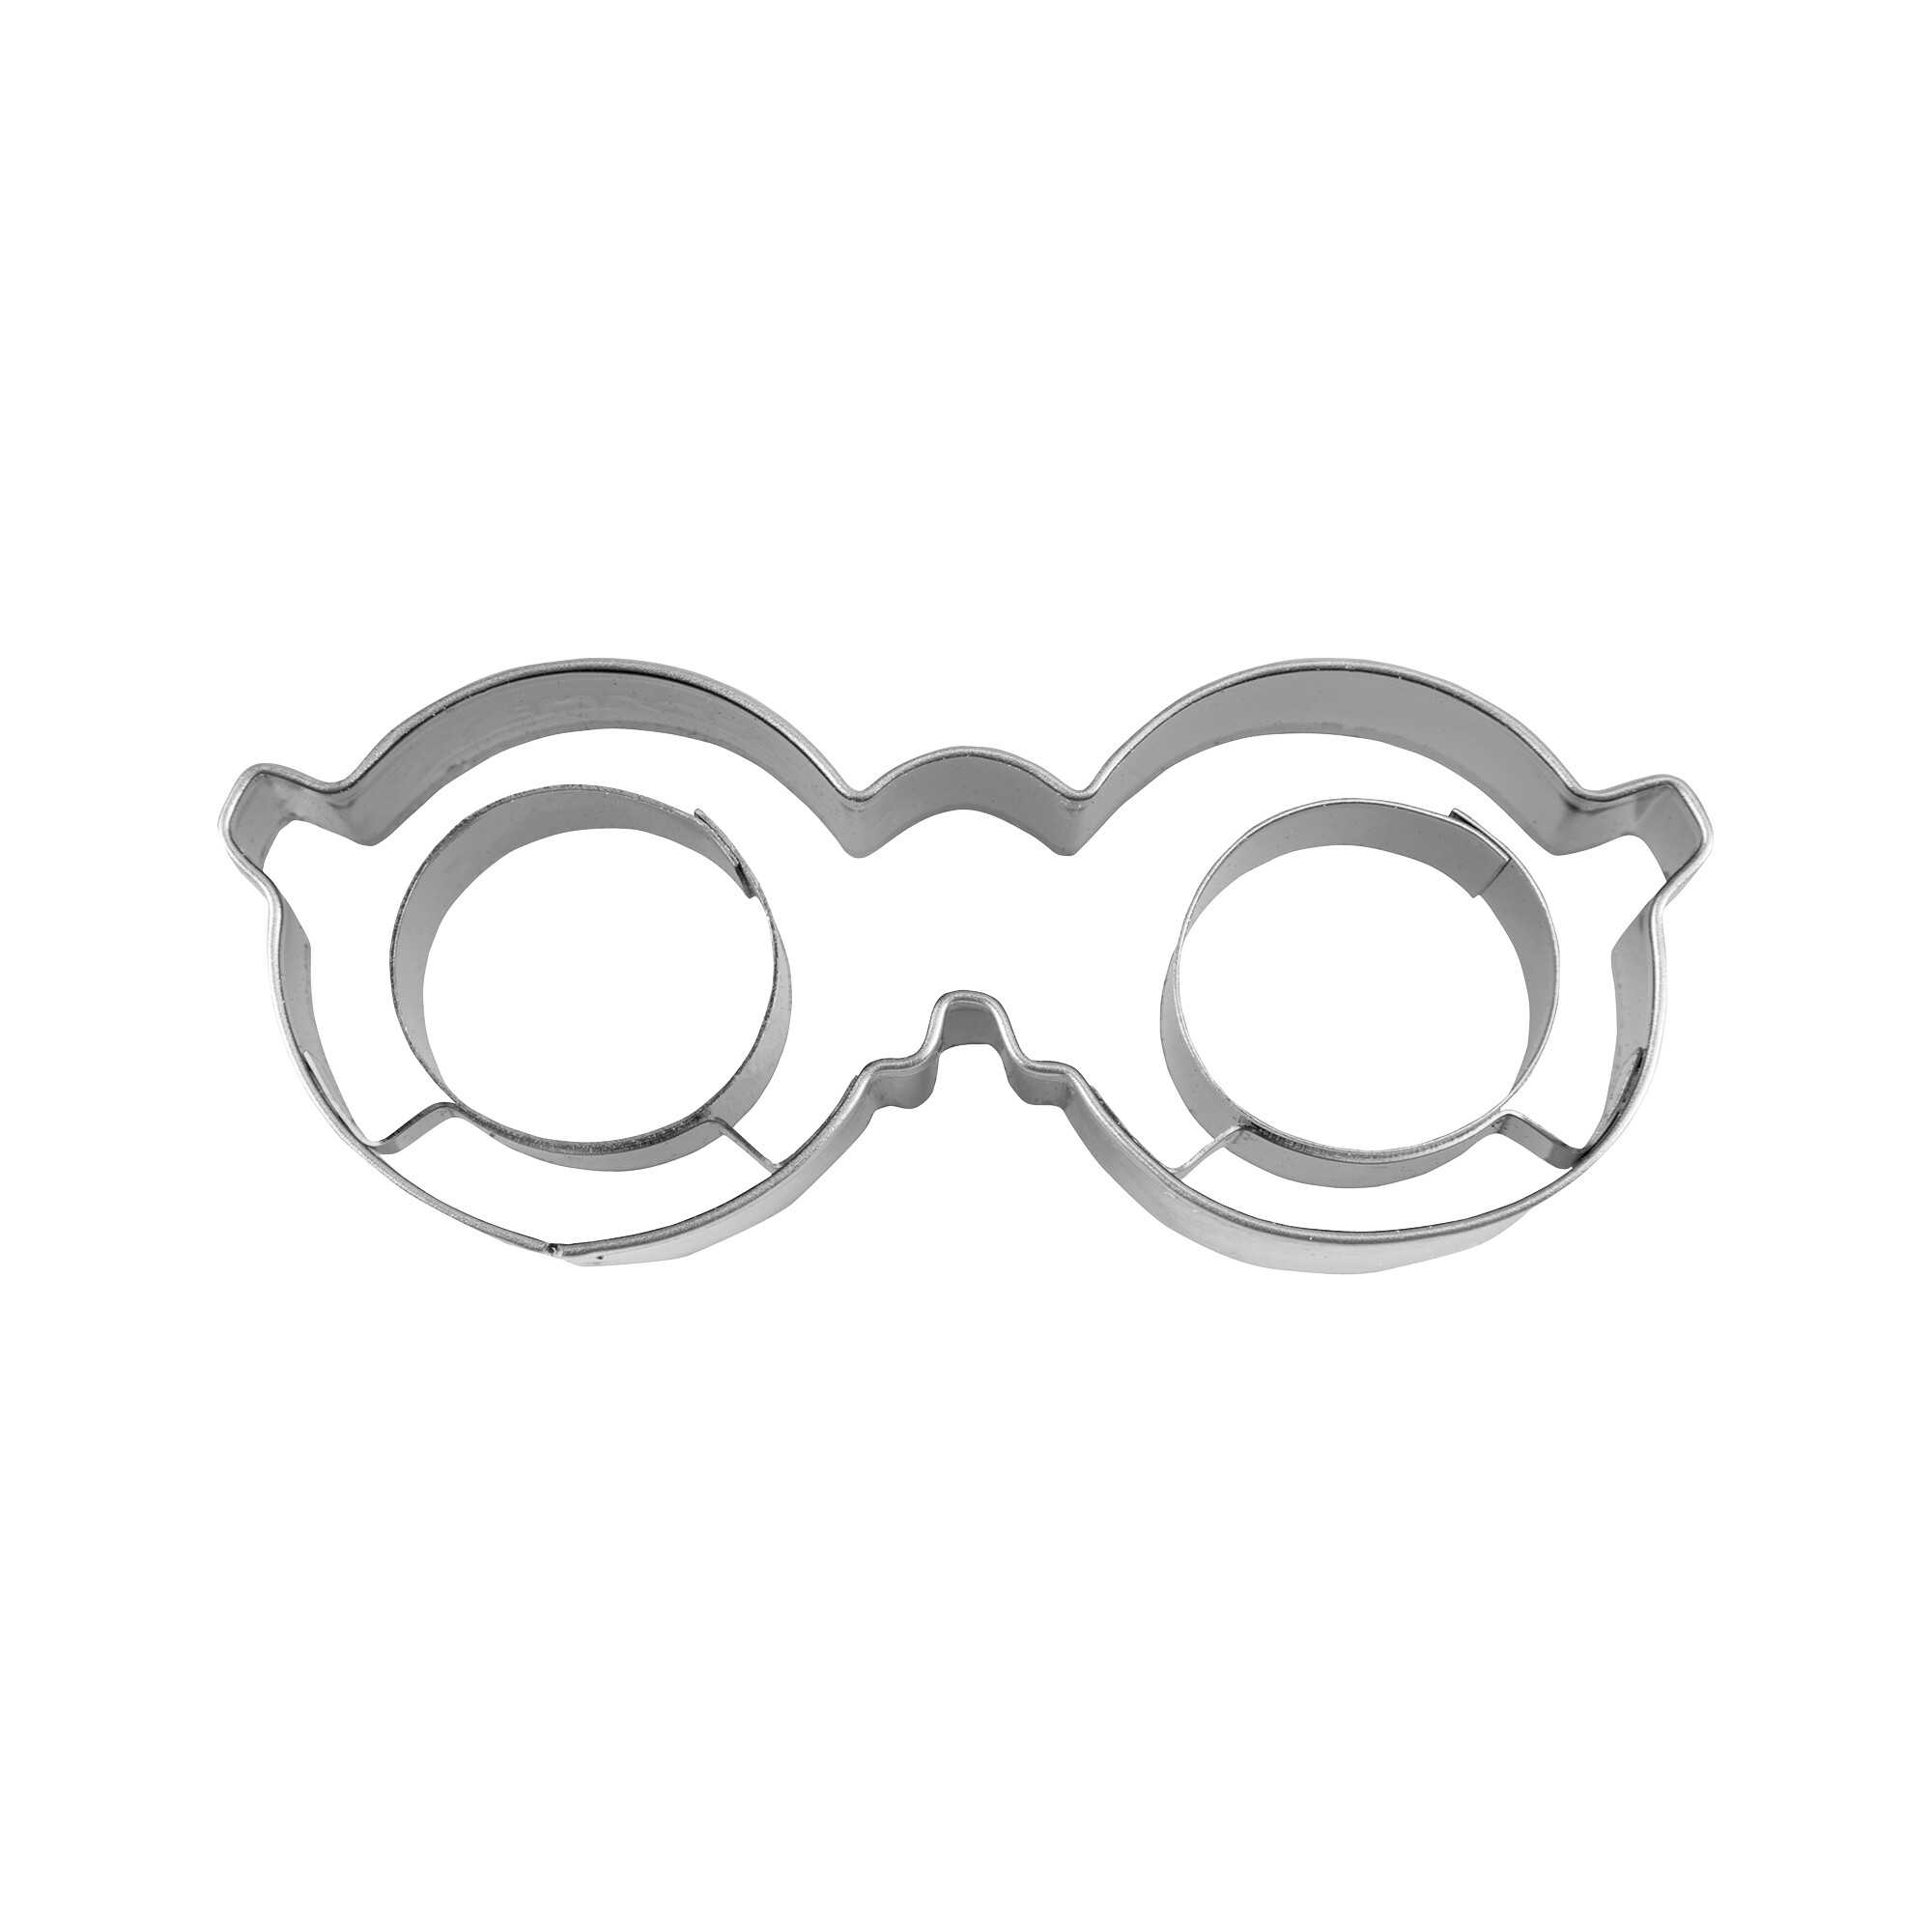 Cookie cutter with stamp – Glasses